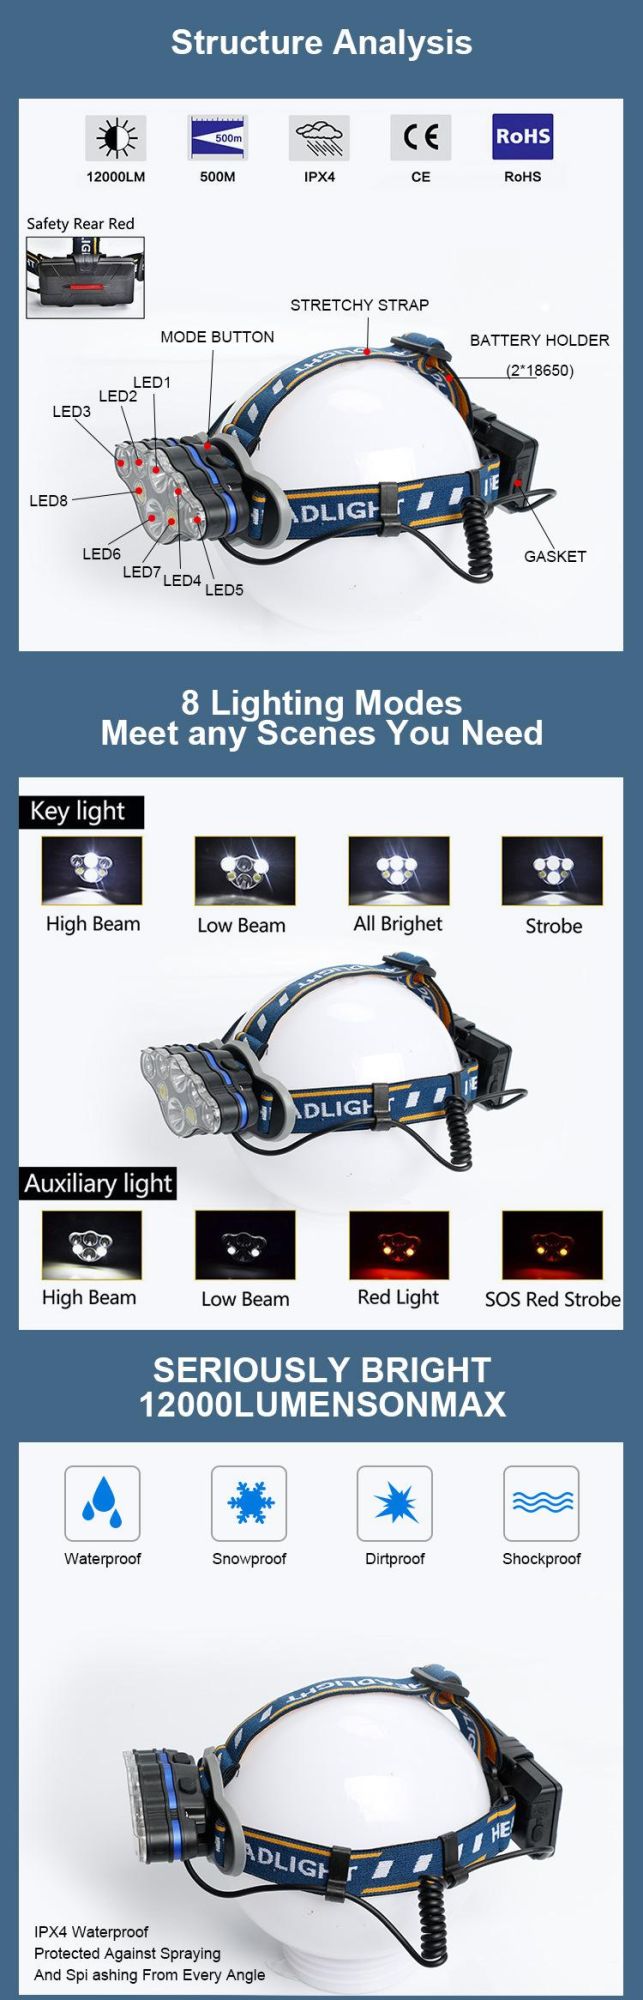 Red Safety Light Best Head Lamp Running Camping Waterproof Headlamps 7 Modes 90-Degree Pivotable Head LED Headlamp